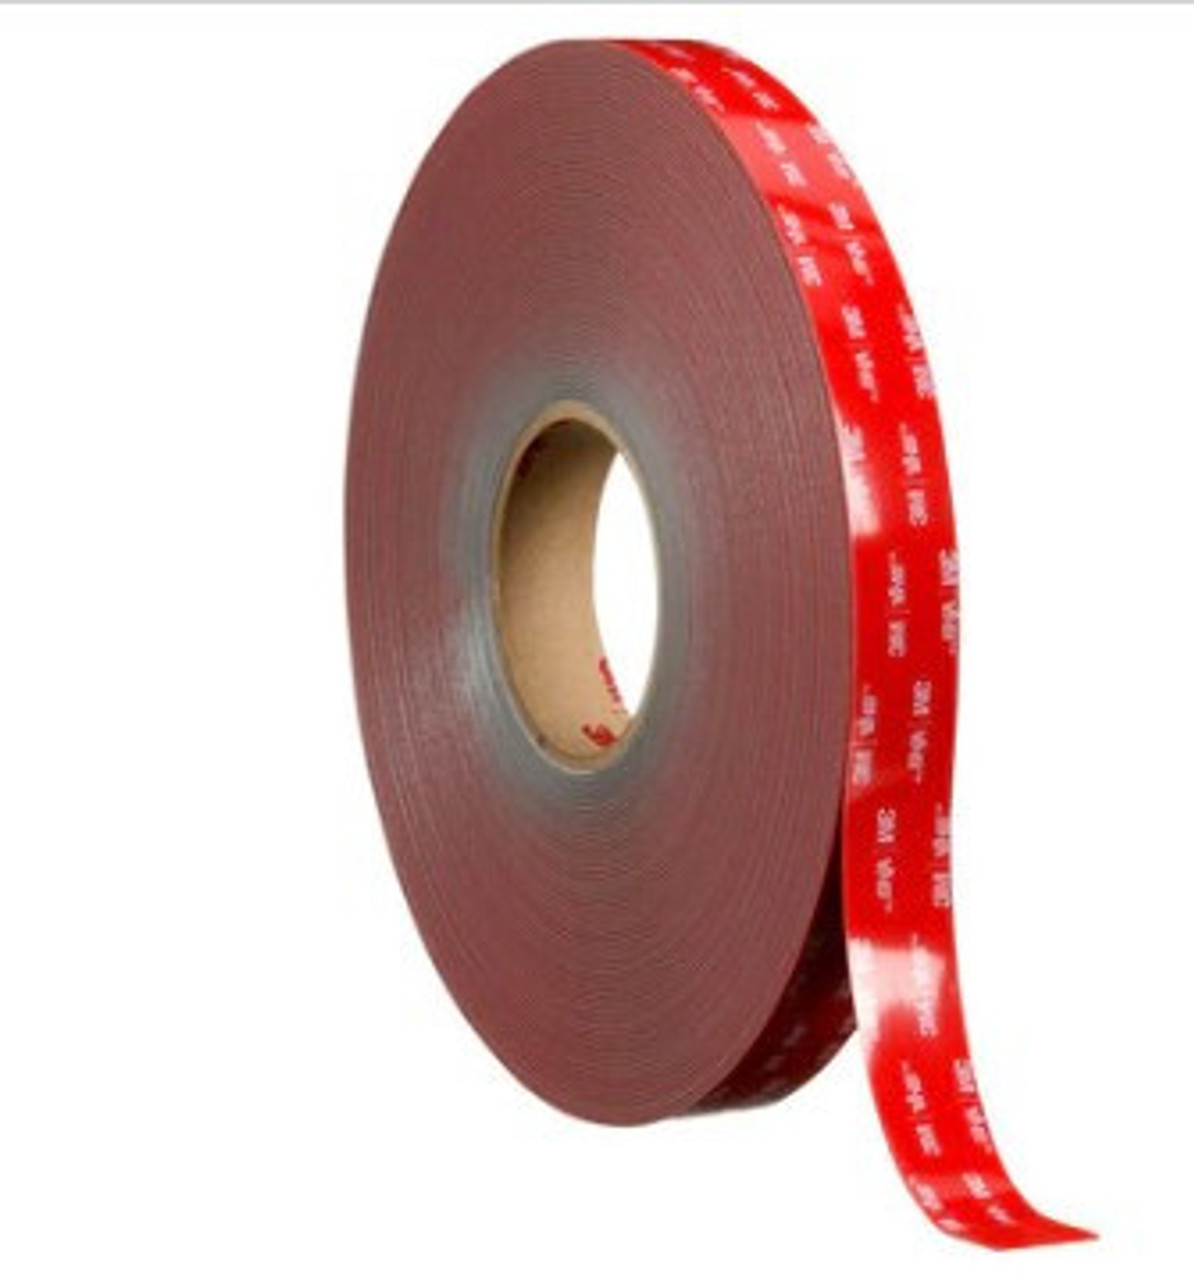 3M™ Double-sided Bonding Tapes, 3M™ VHB Tapes & Grades